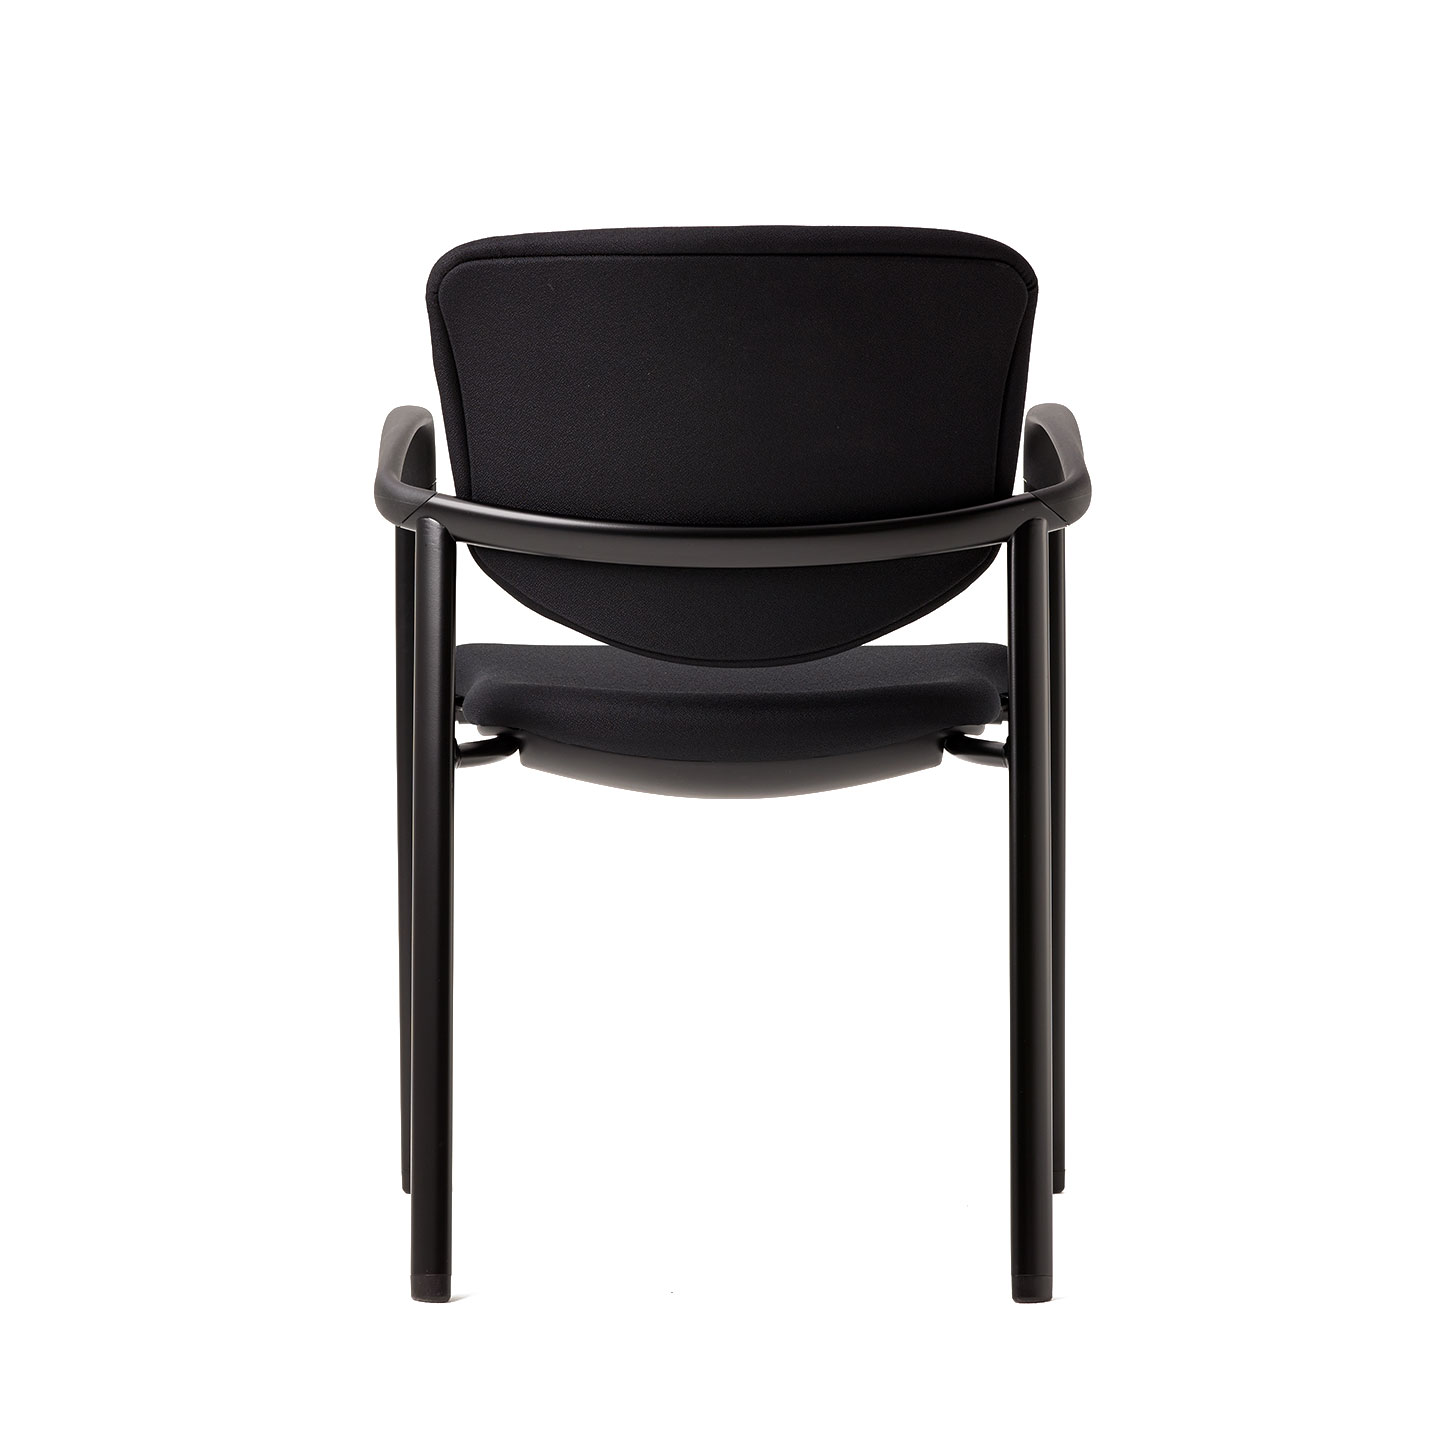 Haworth Improv Side chair in black upholstery rear view